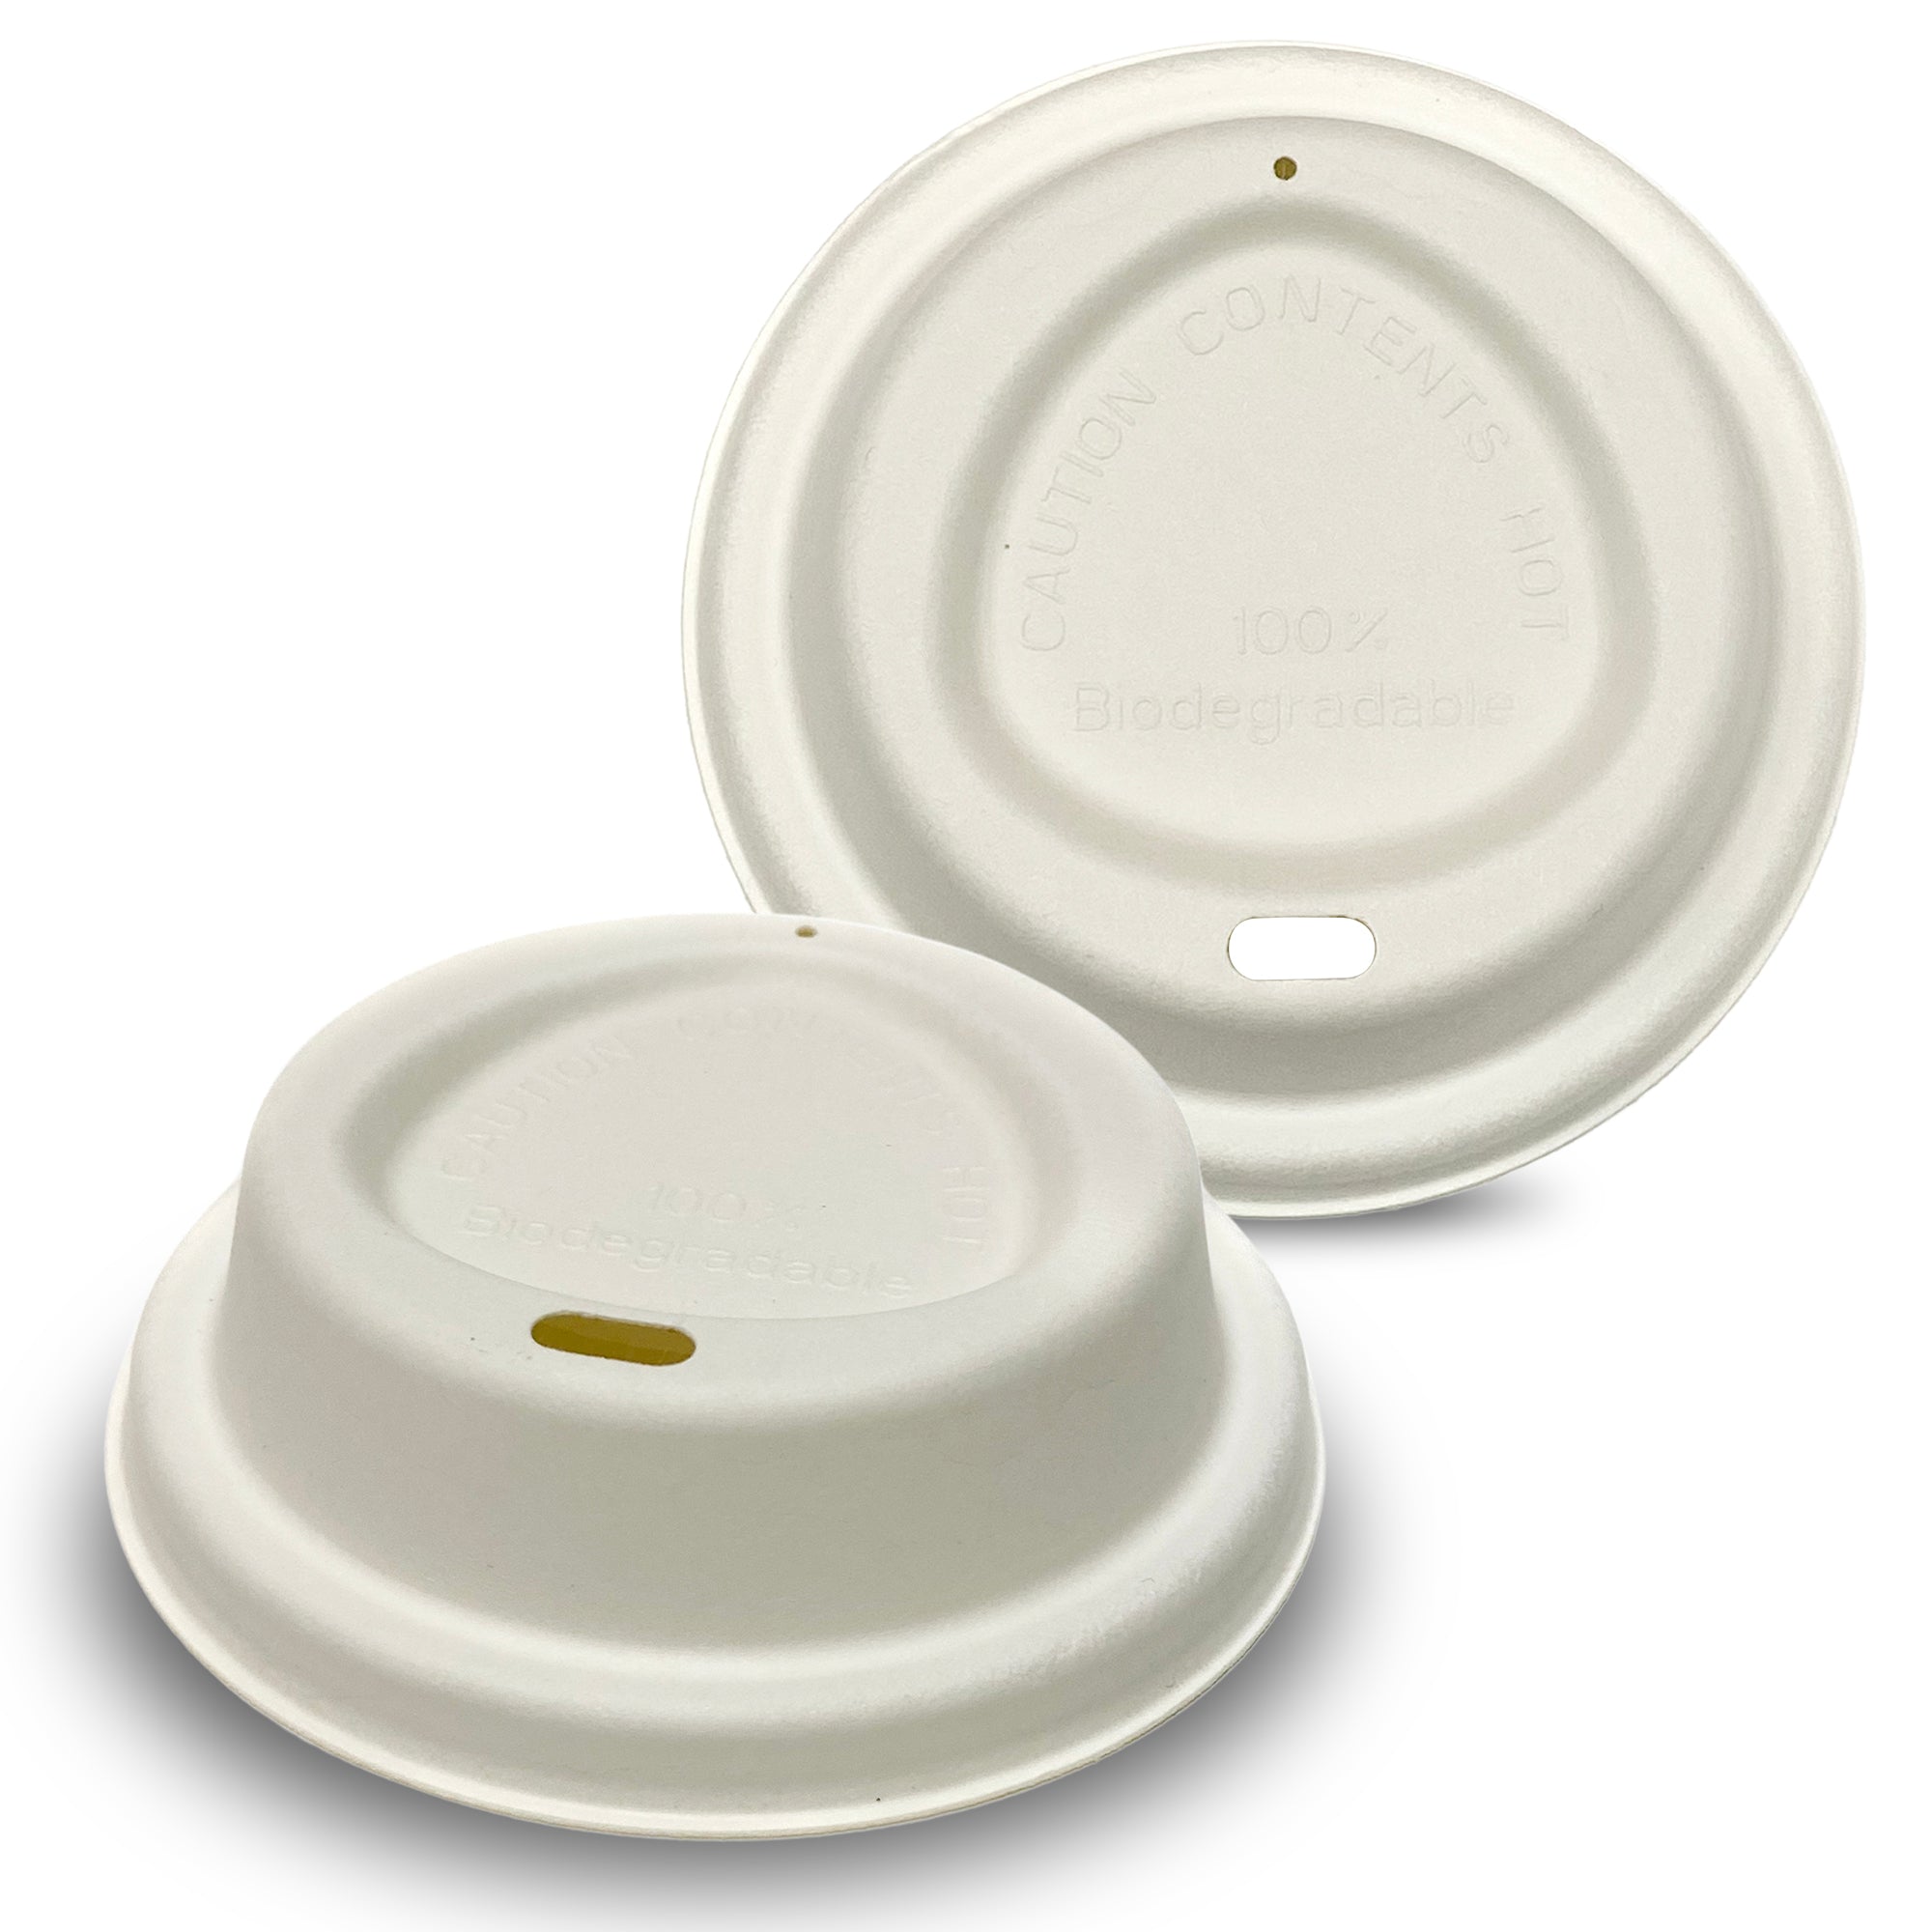 90mm Home Compostable Sugarcane Pulp Lid fits 10oz, 12oz and 16oz Cups